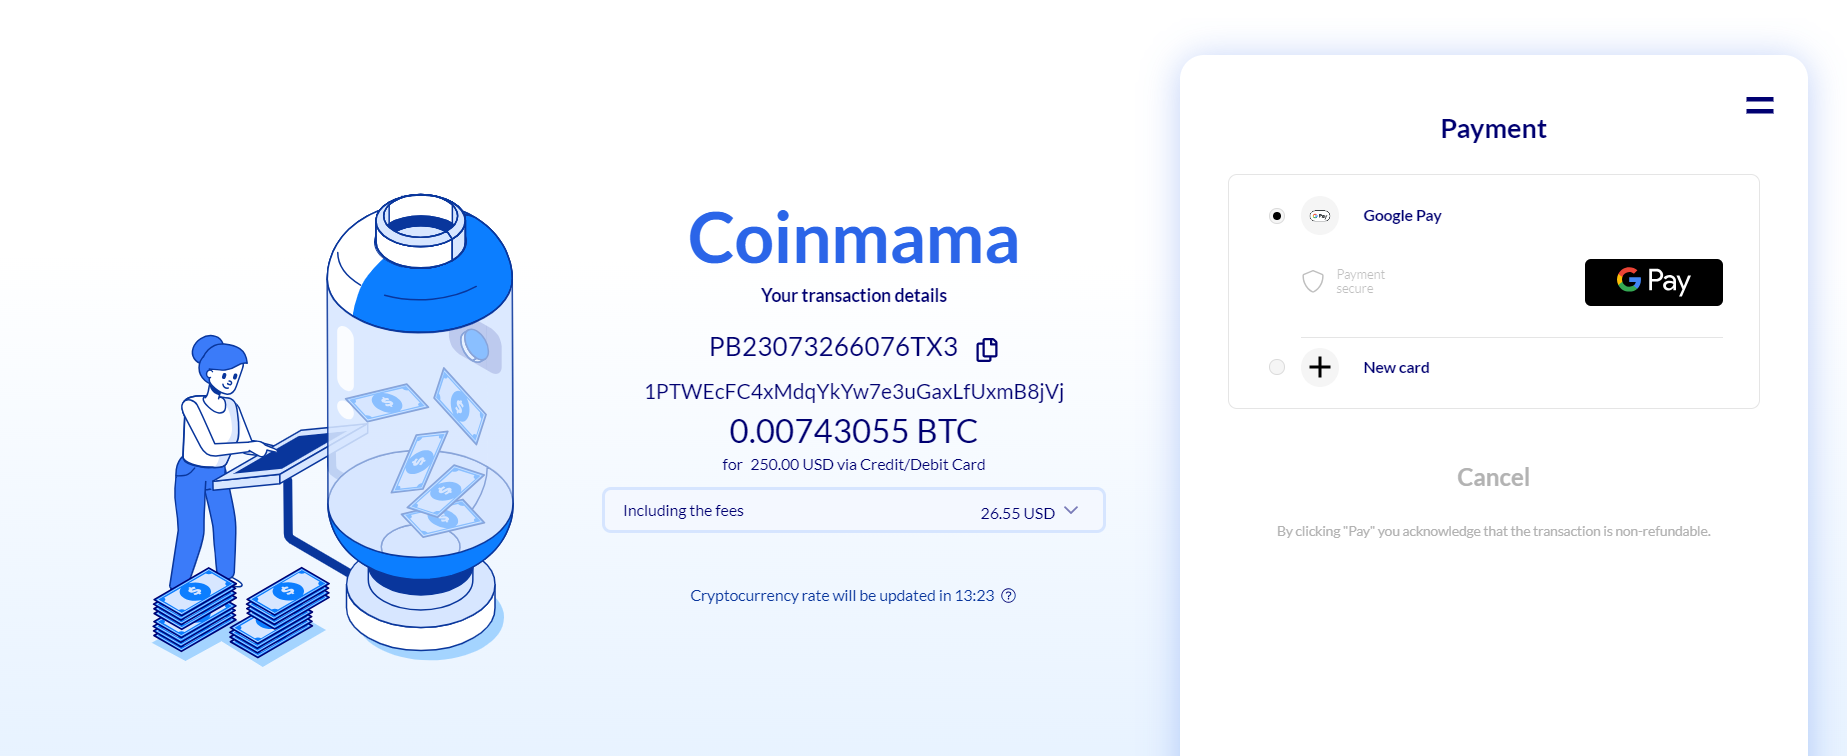 Coinmama Review Features & Fees - Skrumble